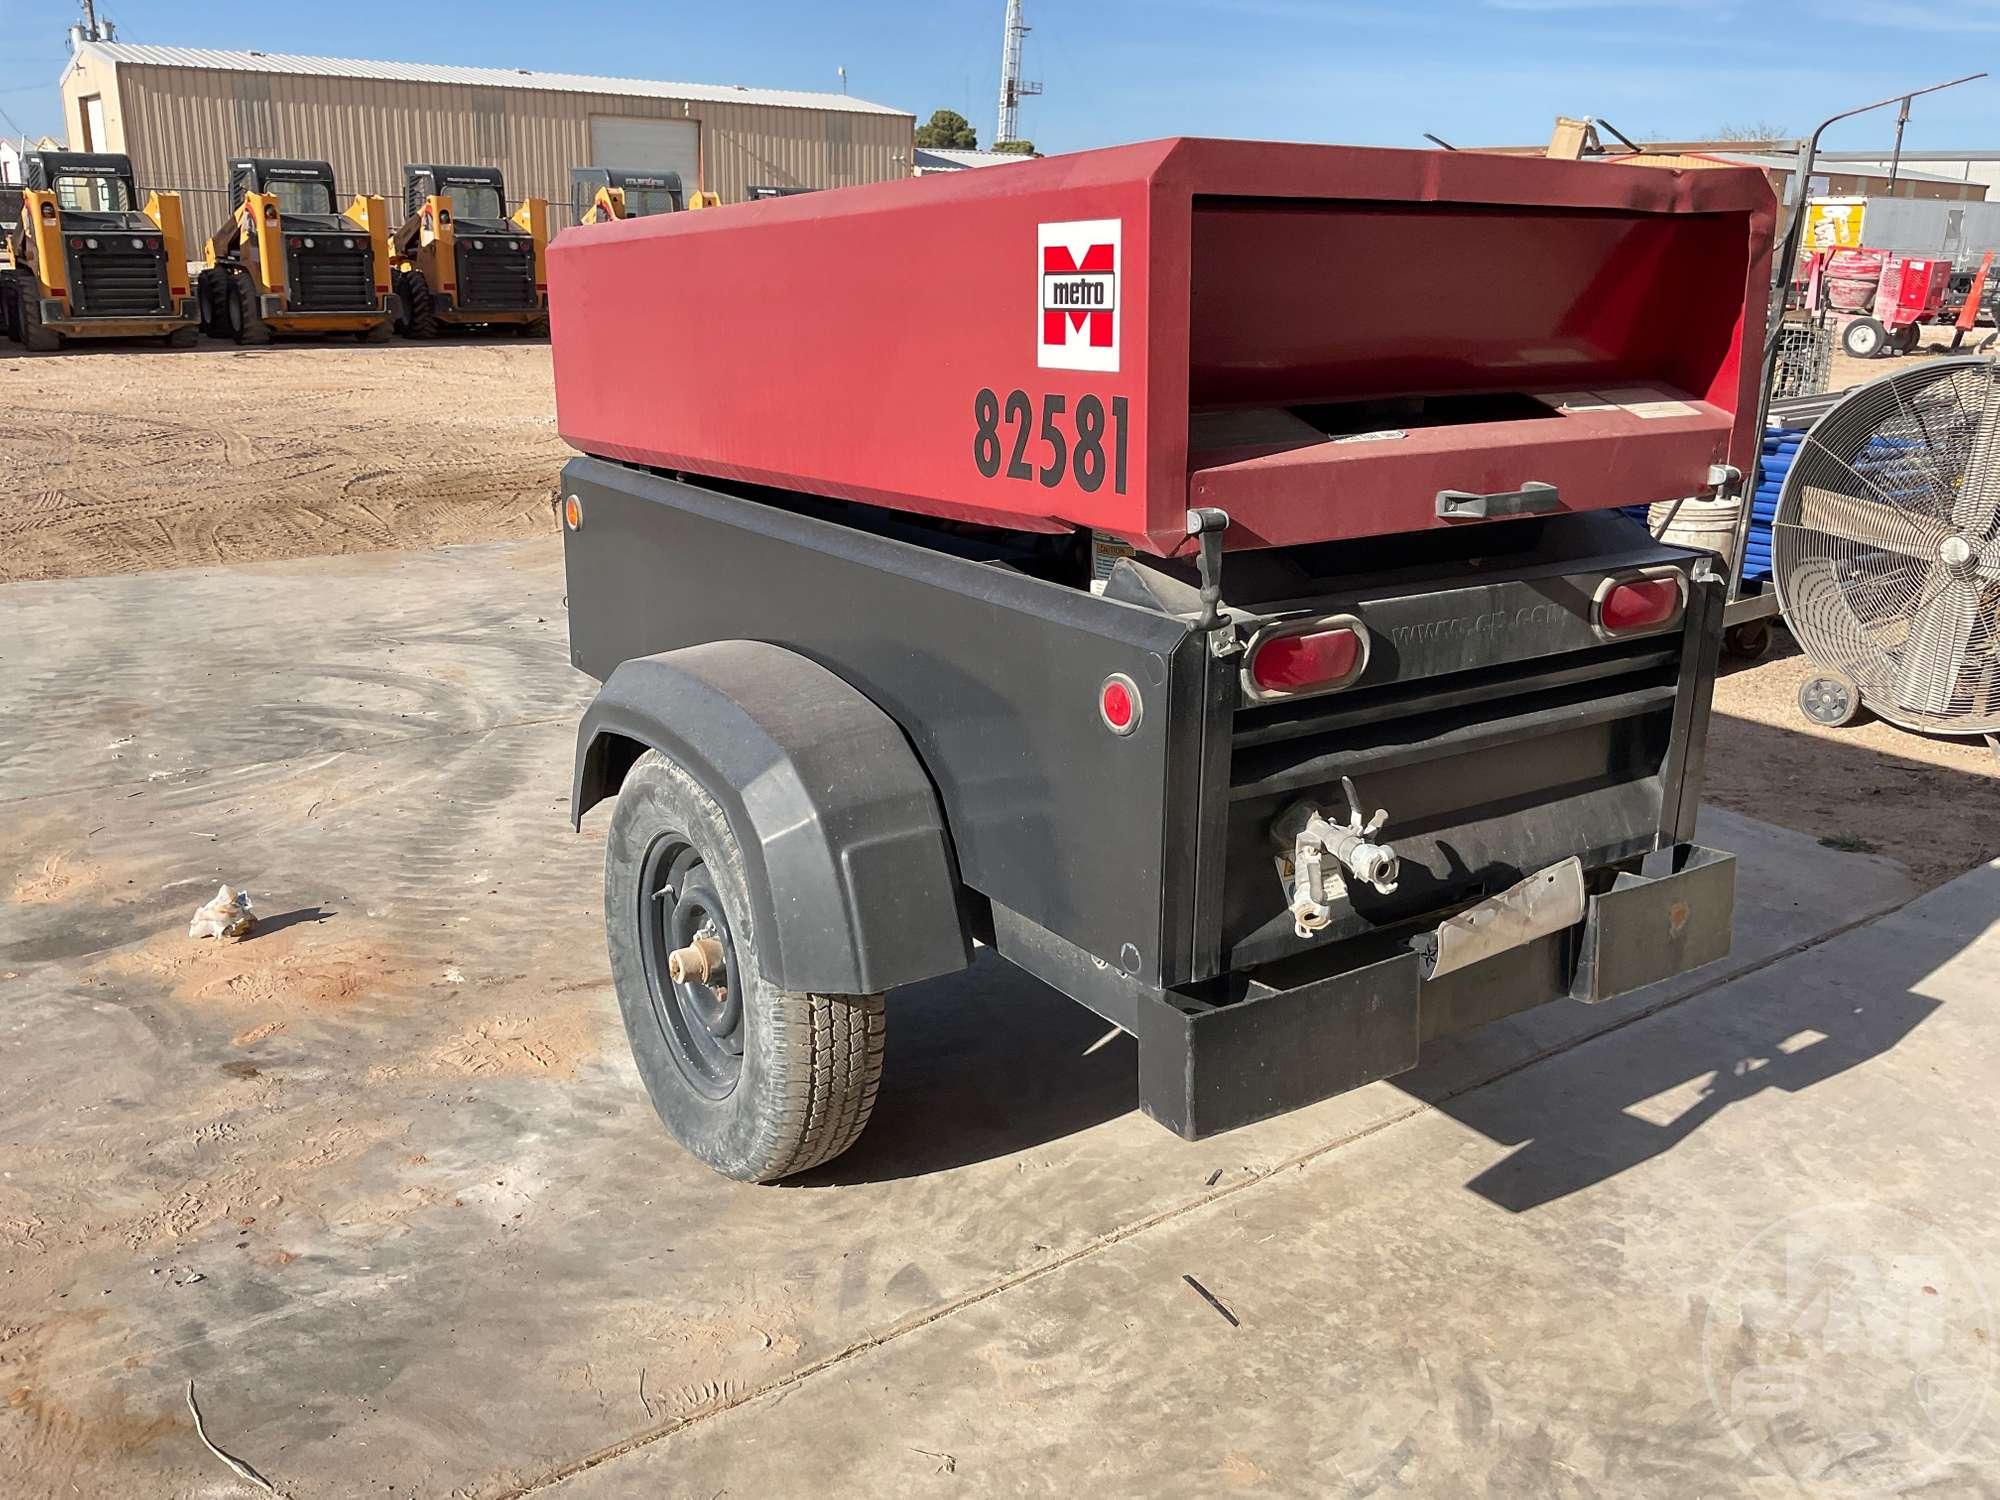 2013 CHICAGO PNEUMATIC CPS185PDTBV 185 PORTABLE AIR COMPRESSOR SN: 82581